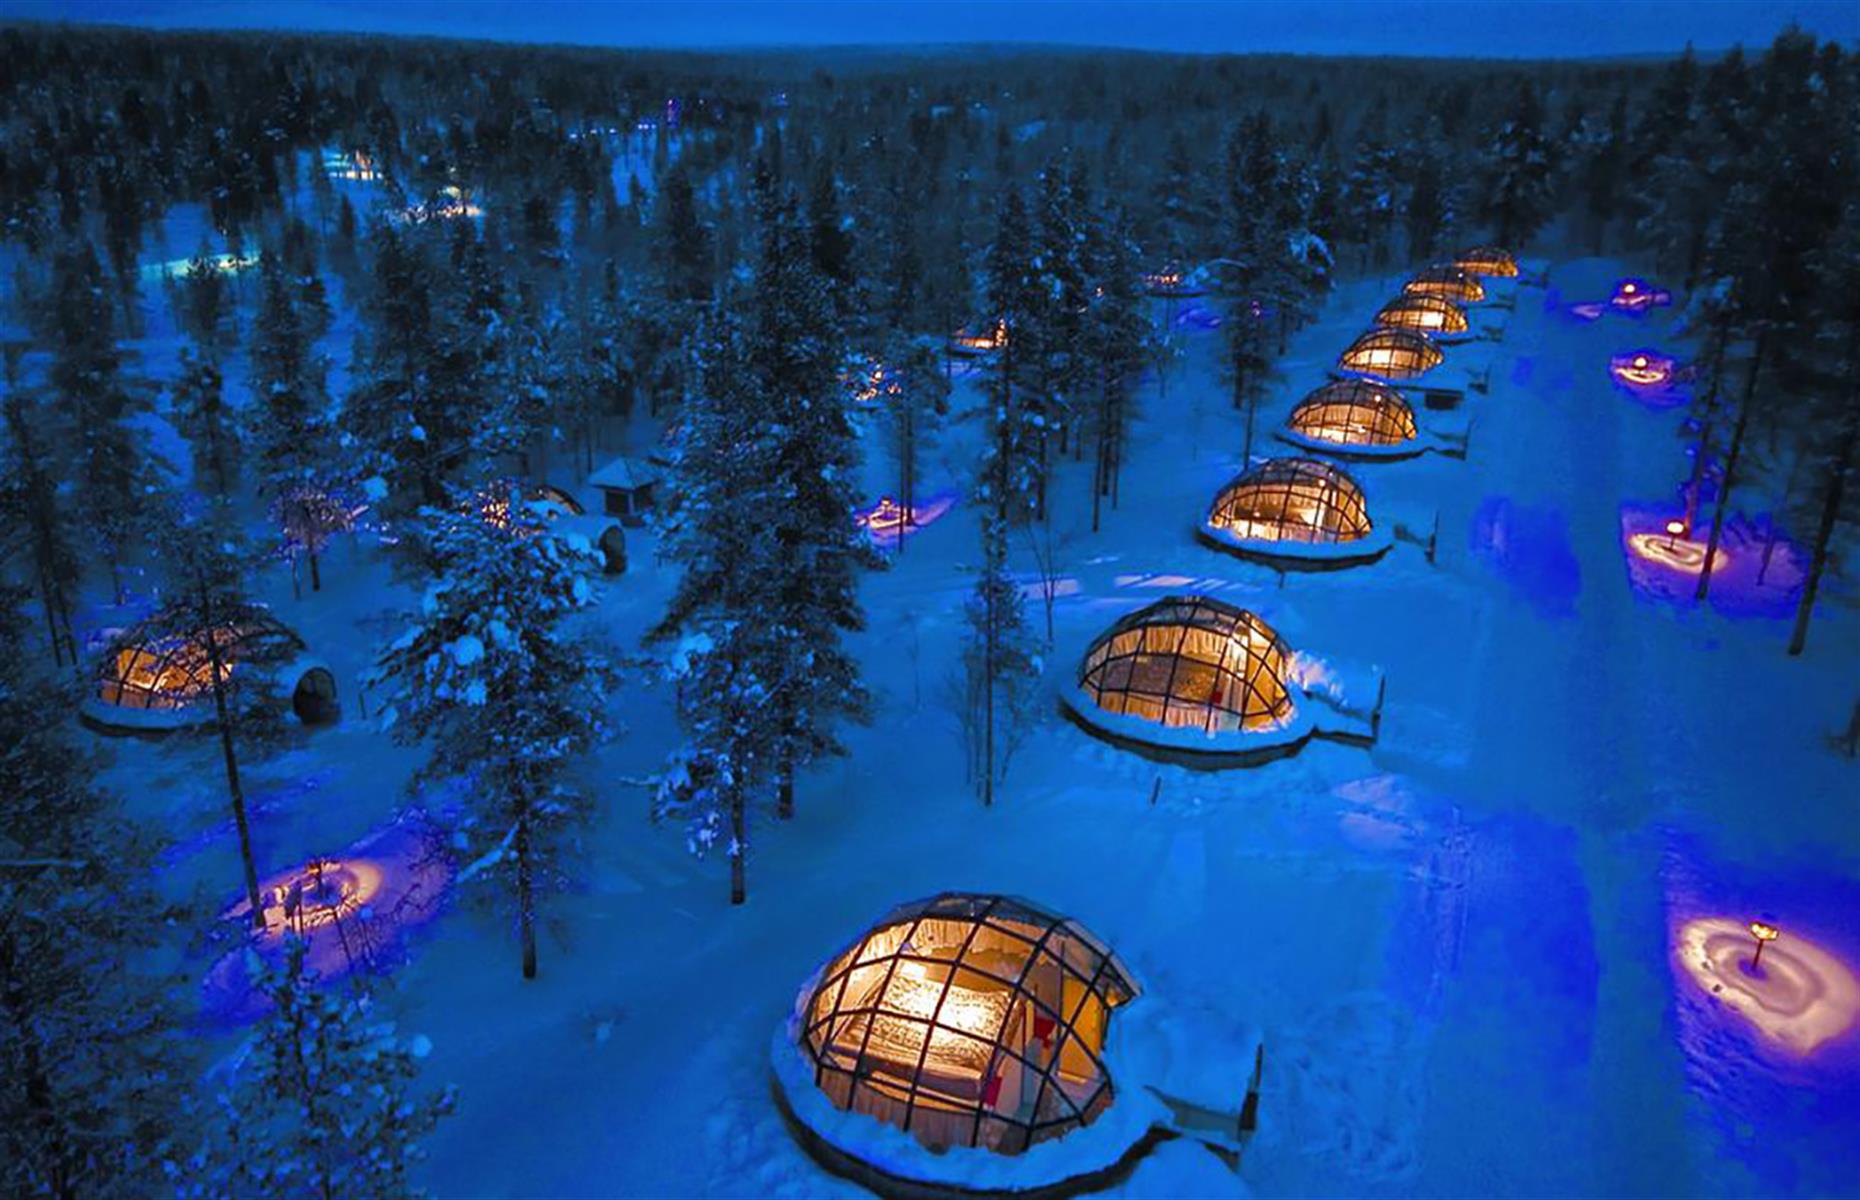 <p>To live the ultimate Northern Lights dream, book a stay at the <a href="https://www.booking.com/hotel/fi/hotelli-kakslauttanen.en-gb.html" rel="nofollow” target=">Kakslauttanen Arctic Resort</a> in Lapland, Finland. Hidden deep in a snow-clad forest, the glass igloos and traditional wooden chalets offer unparalleled views, perfect for observing the light show in the sky. Some igloos even have a private sauna in the bathroom for you to make the most of your Arctic adventure.</p>